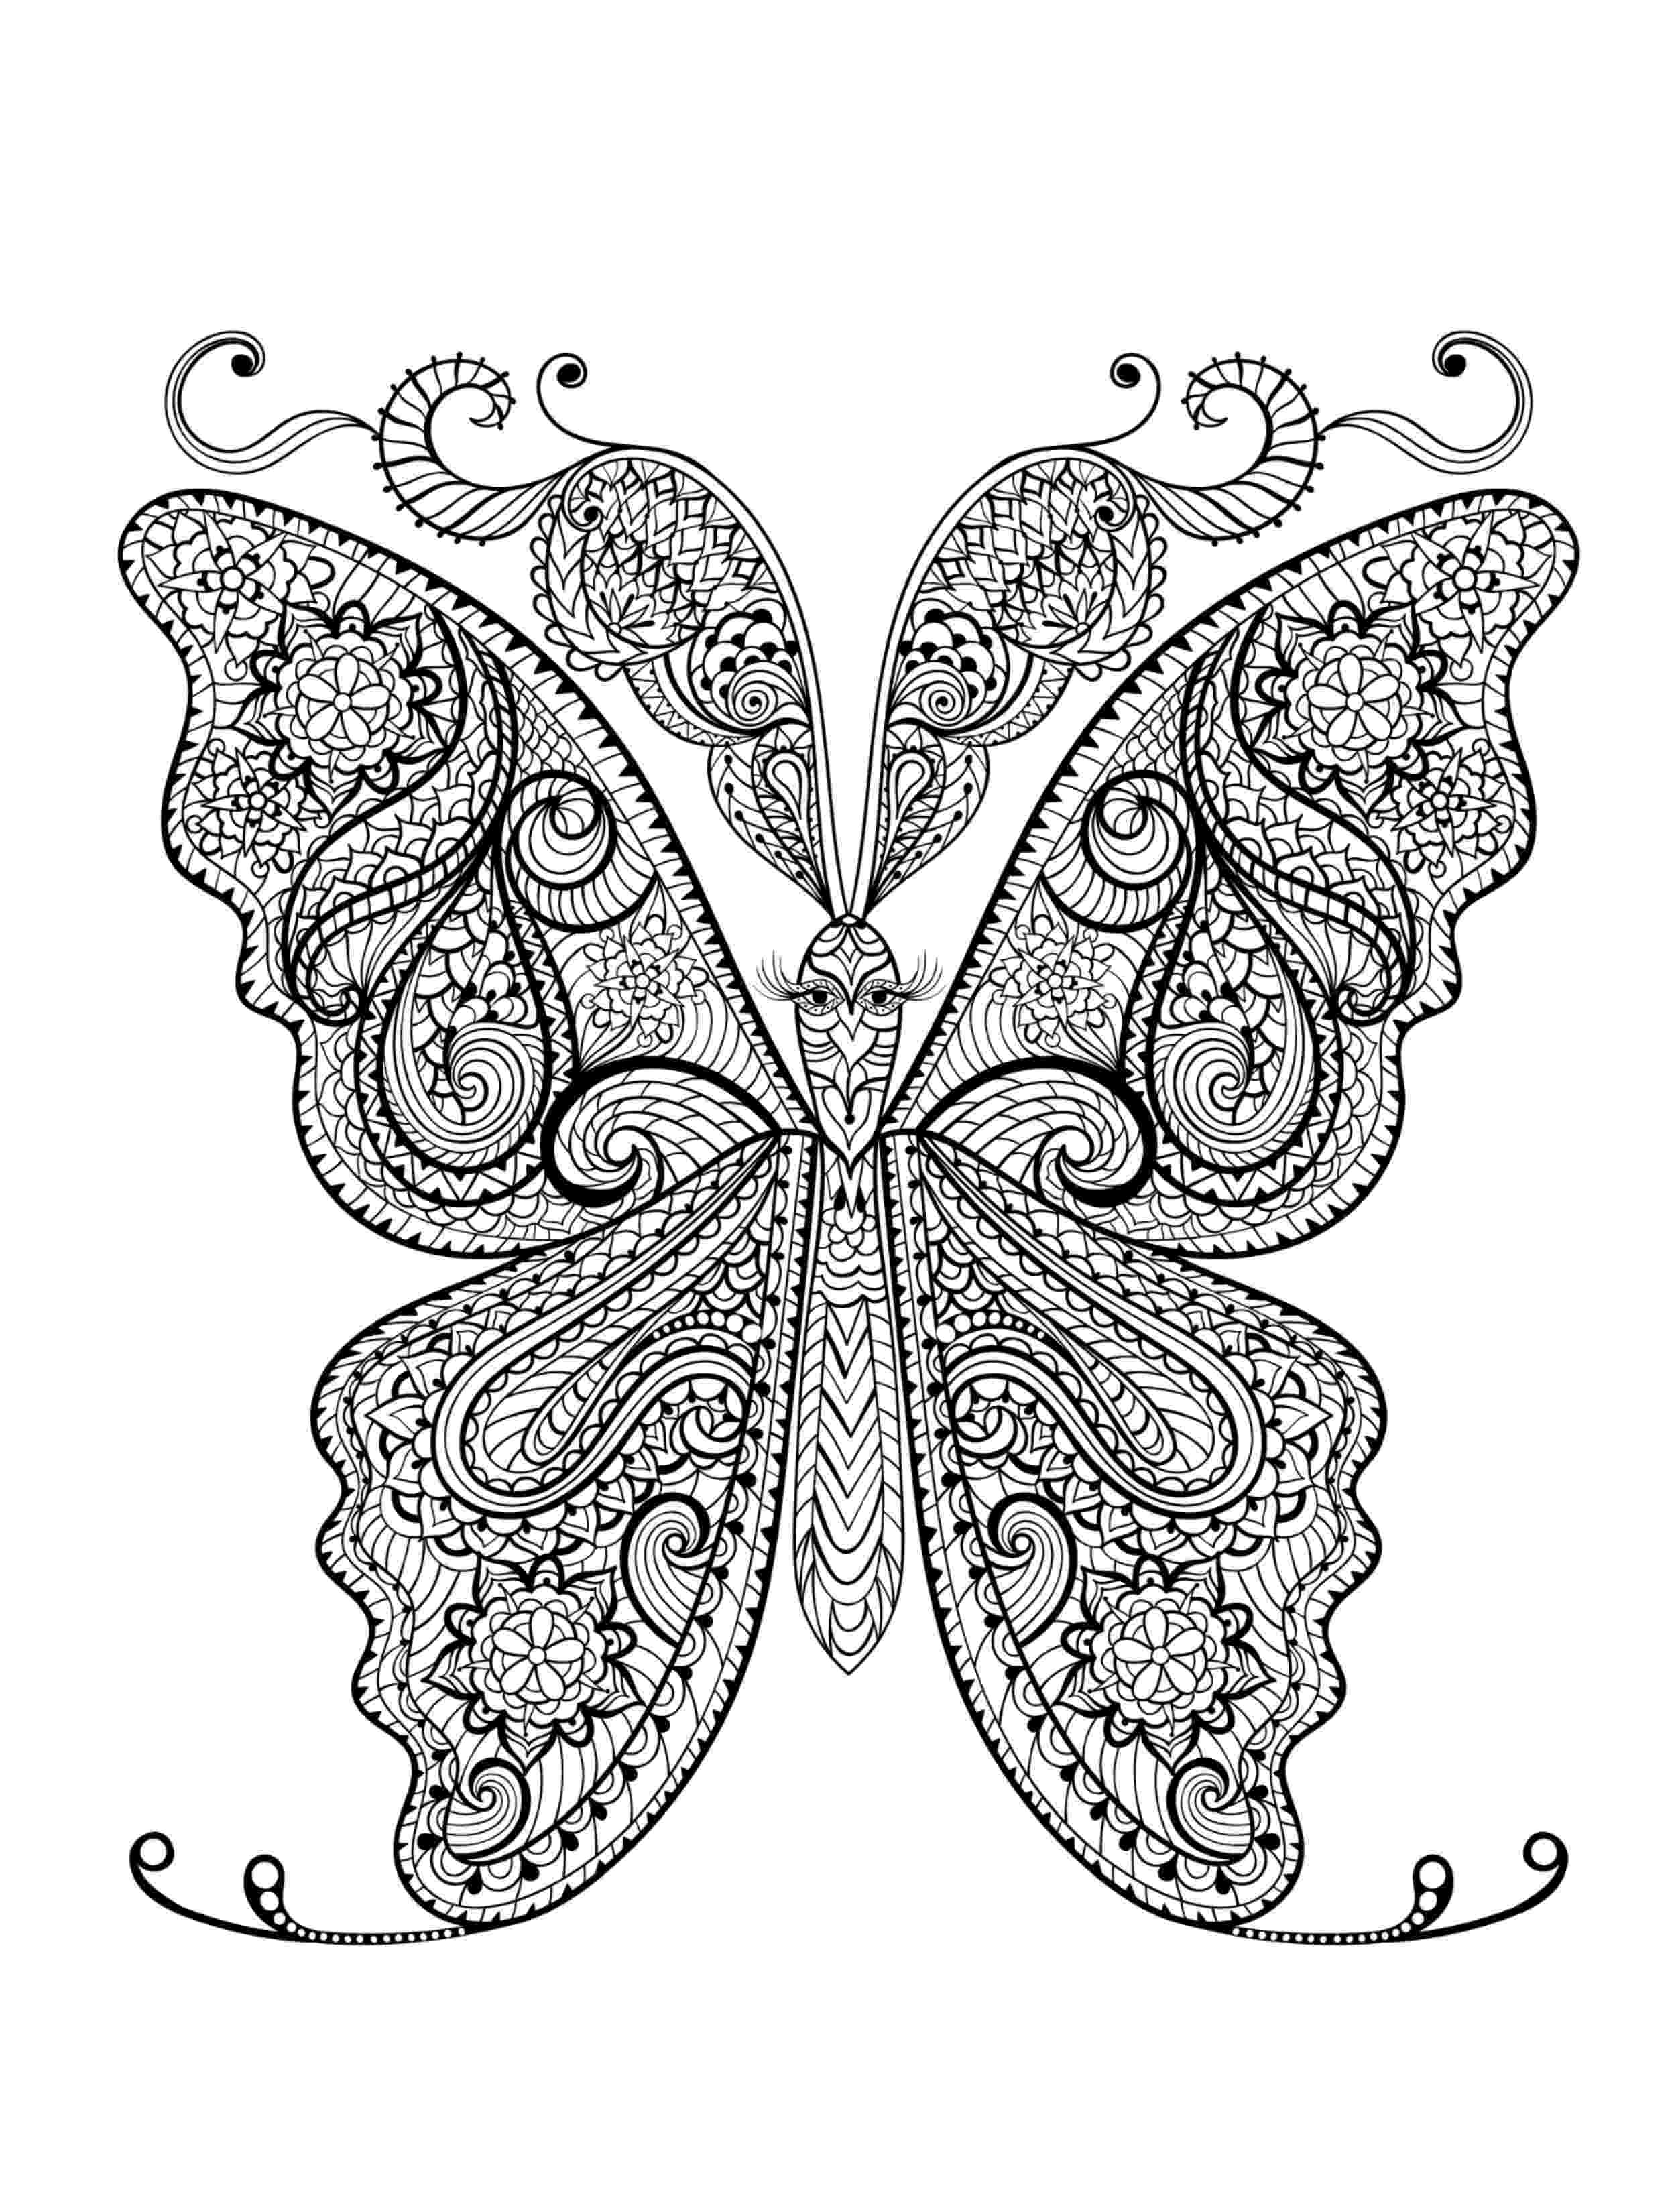 animal colouring pages free animal coloring pages for adults best coloring pages for free animal pages colouring 